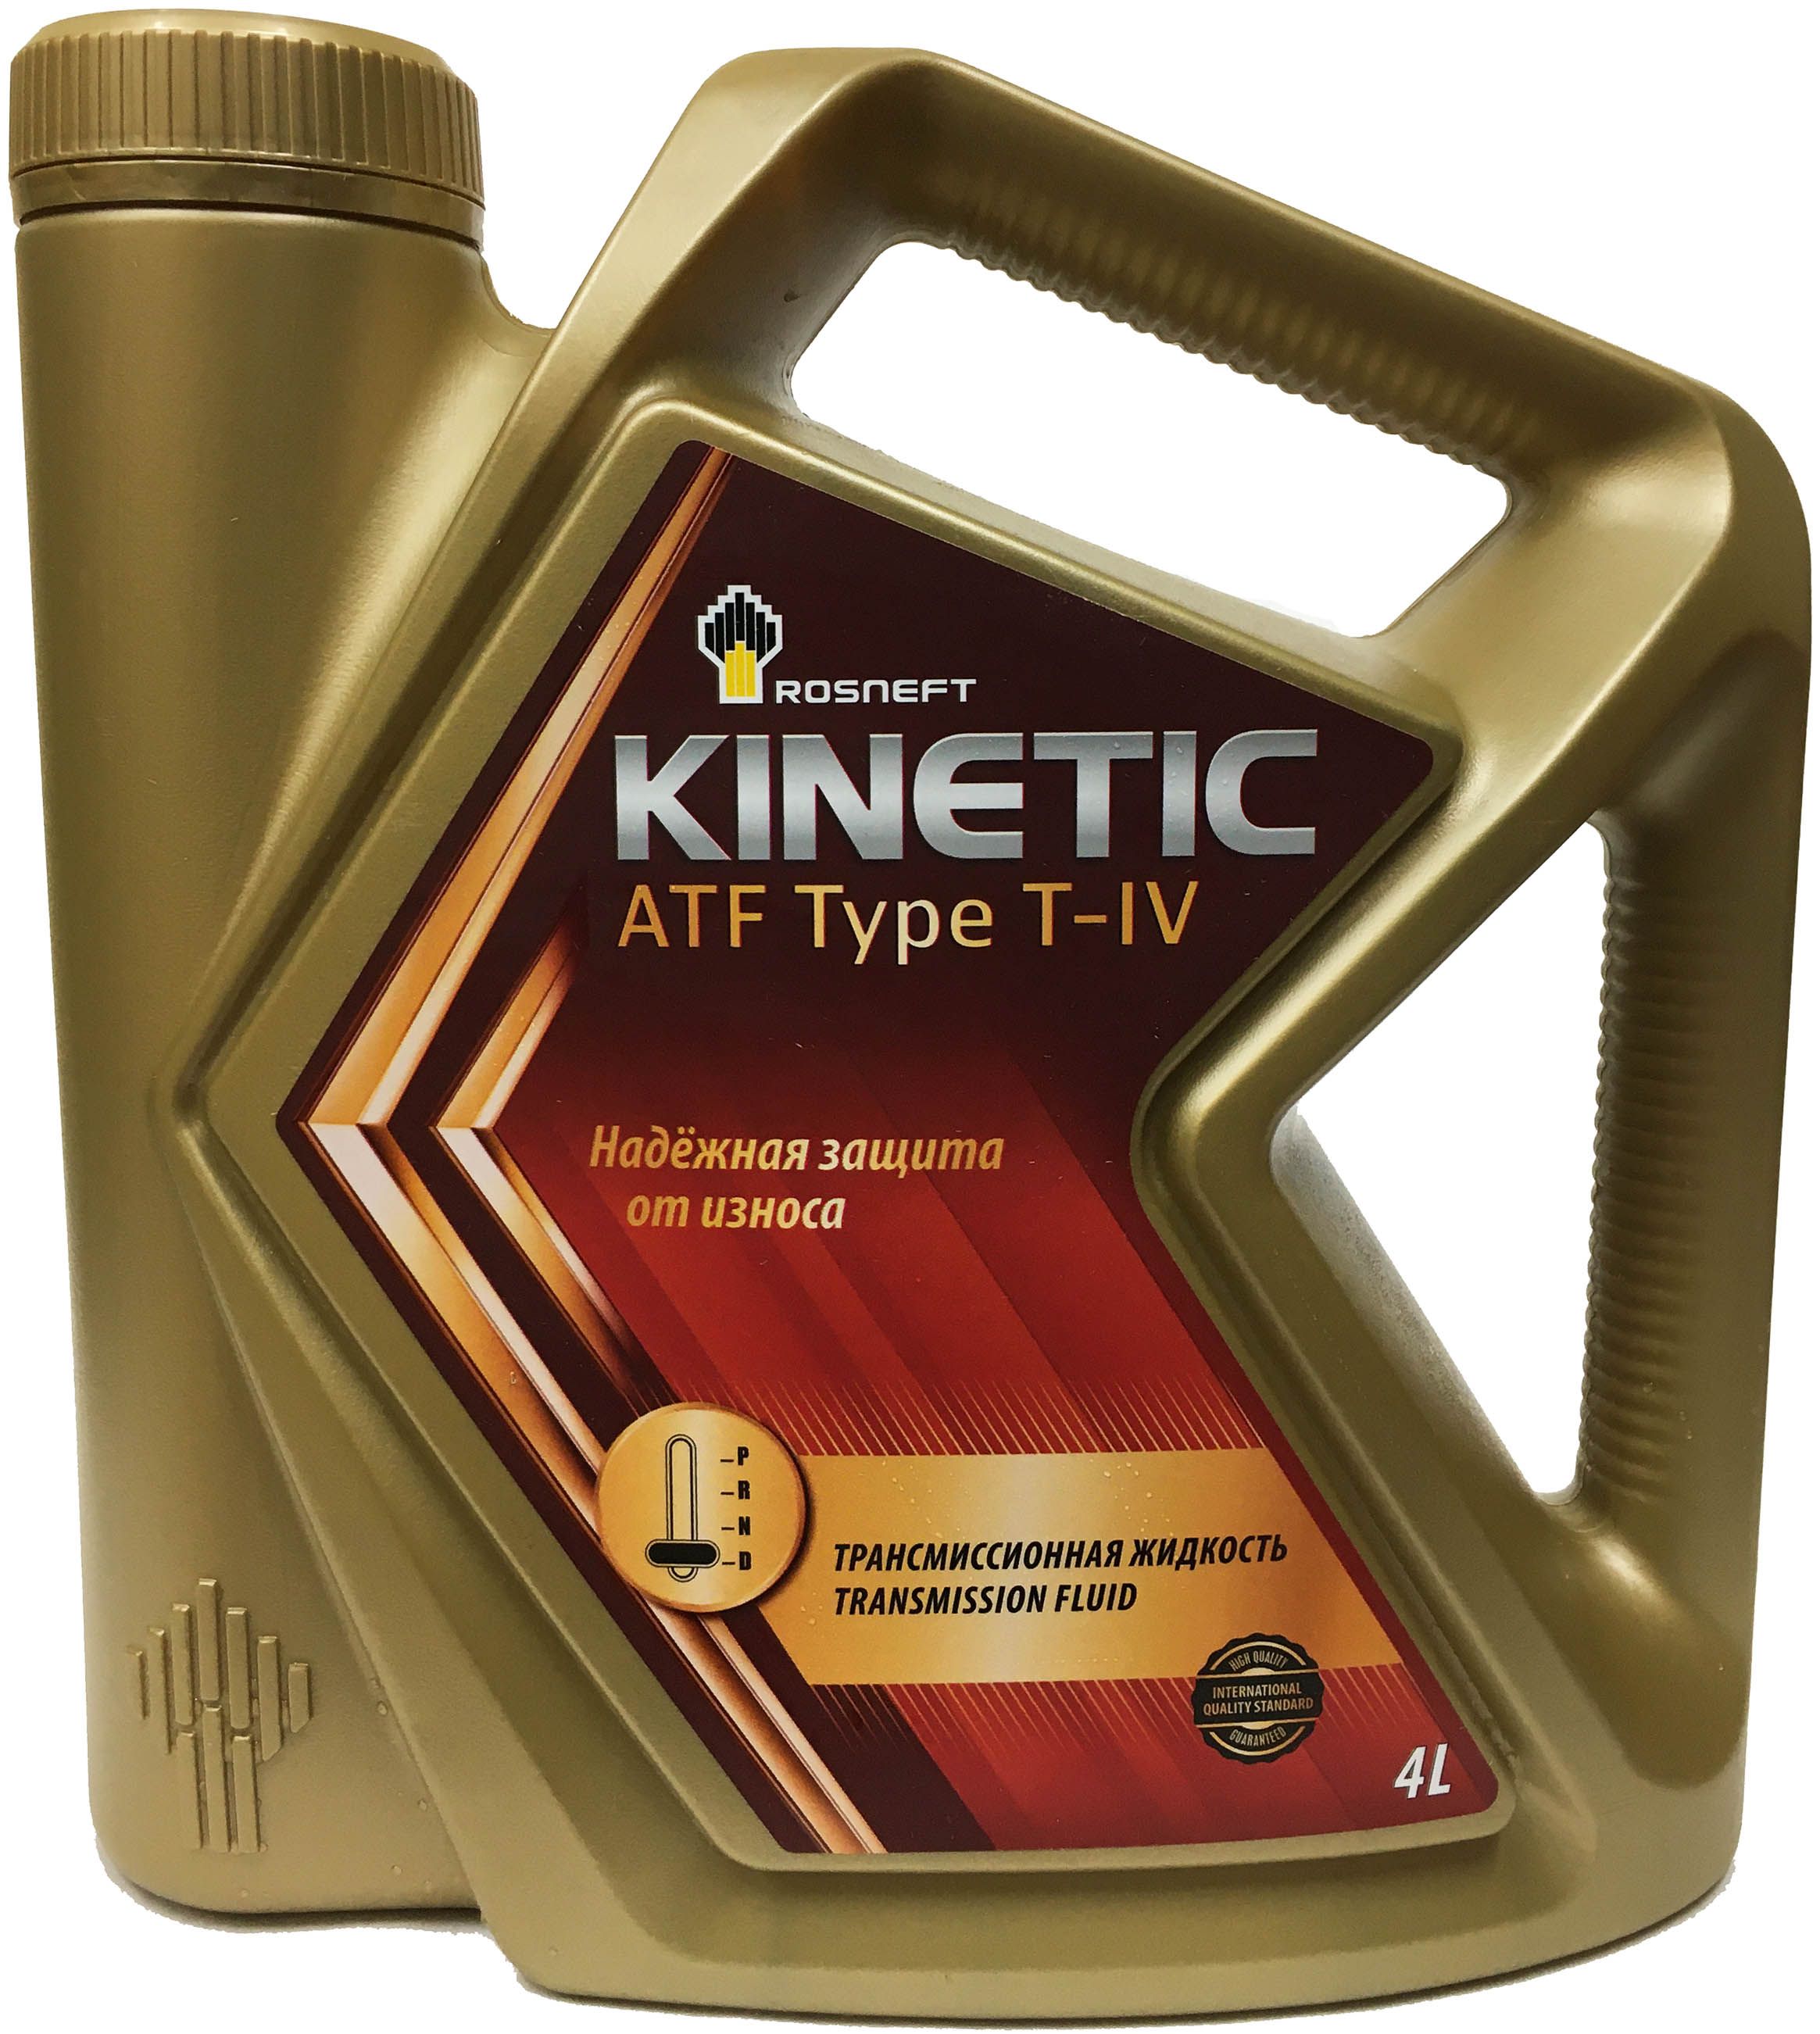 Масла atf type t iv. ATF Type t-IV. Rosneft Kinetic ATF Type t-IV. Масло Rosneft Kinetic ATF 2d. Takayama ATF Type t-IV.